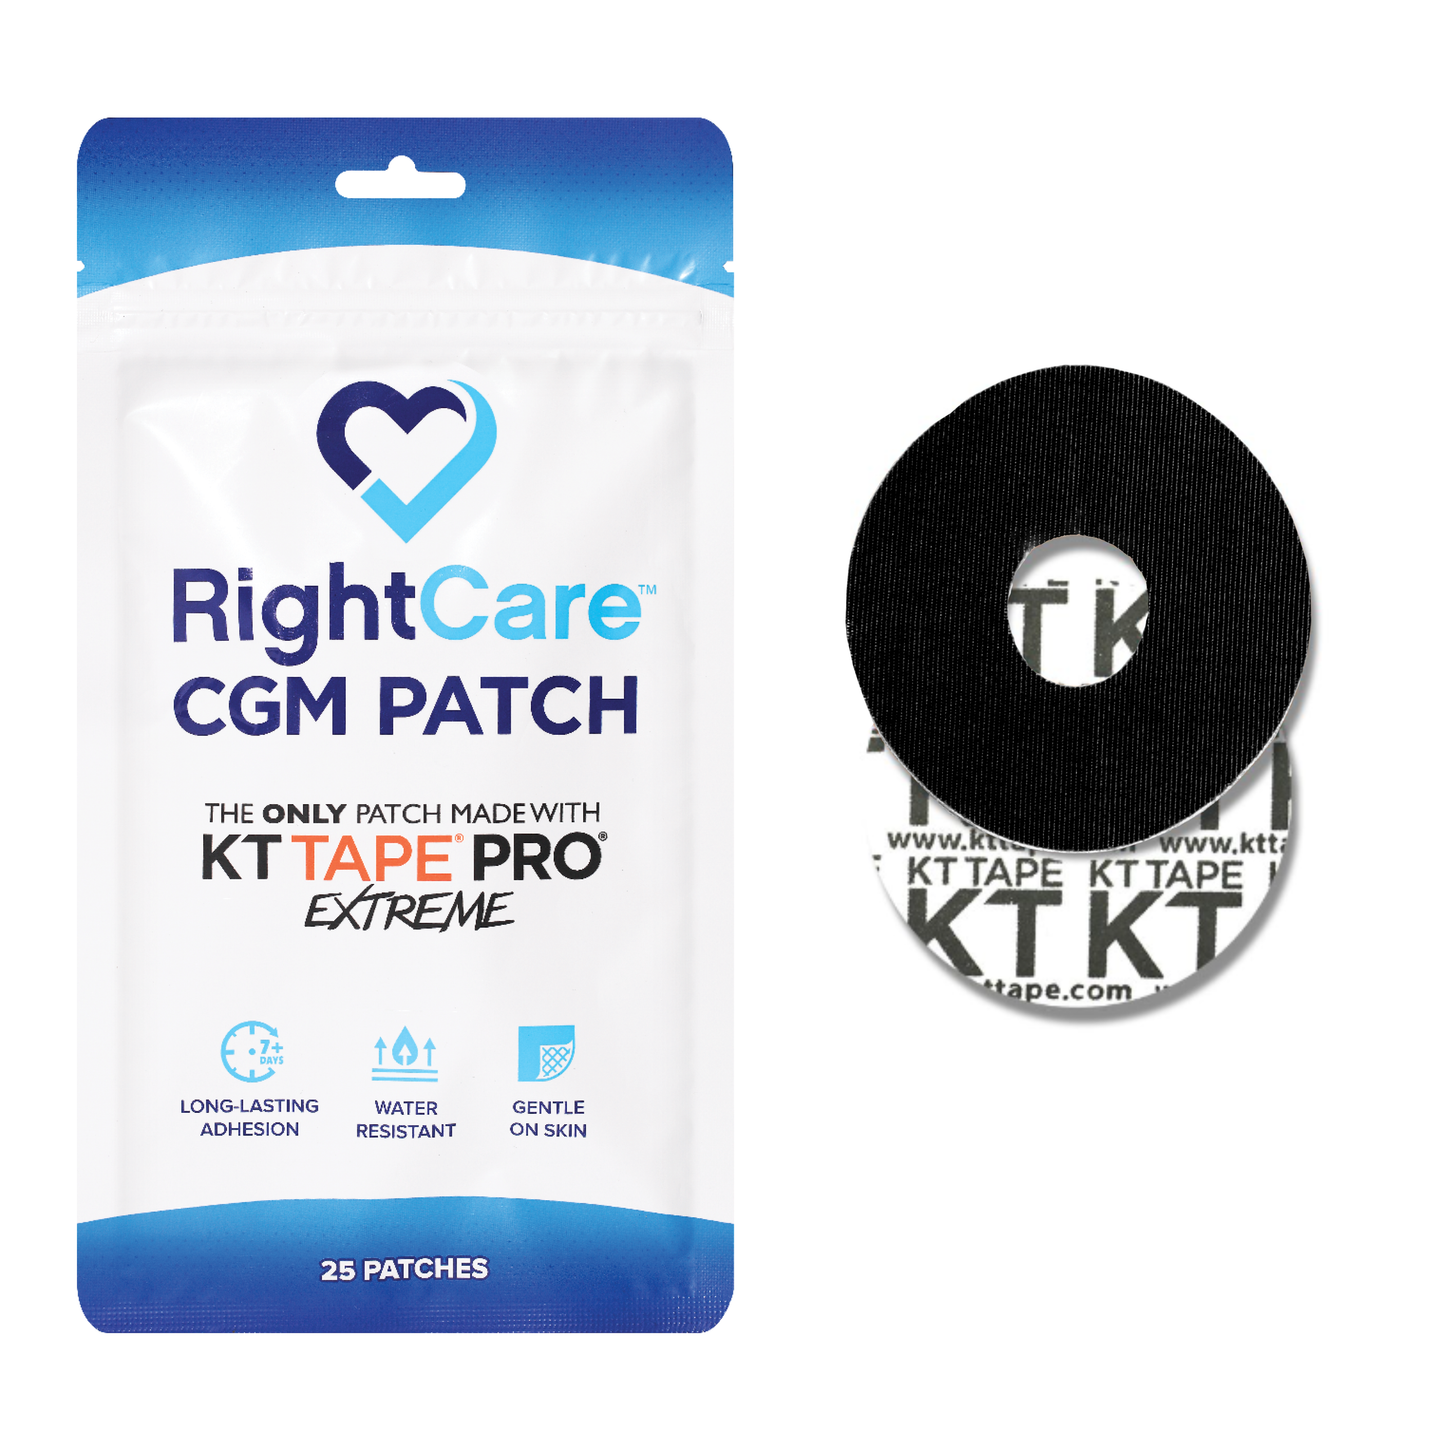 RightCare CGM Adhesive Patch made with KT Tape, Dexcom G7, Bag of 25 65559003